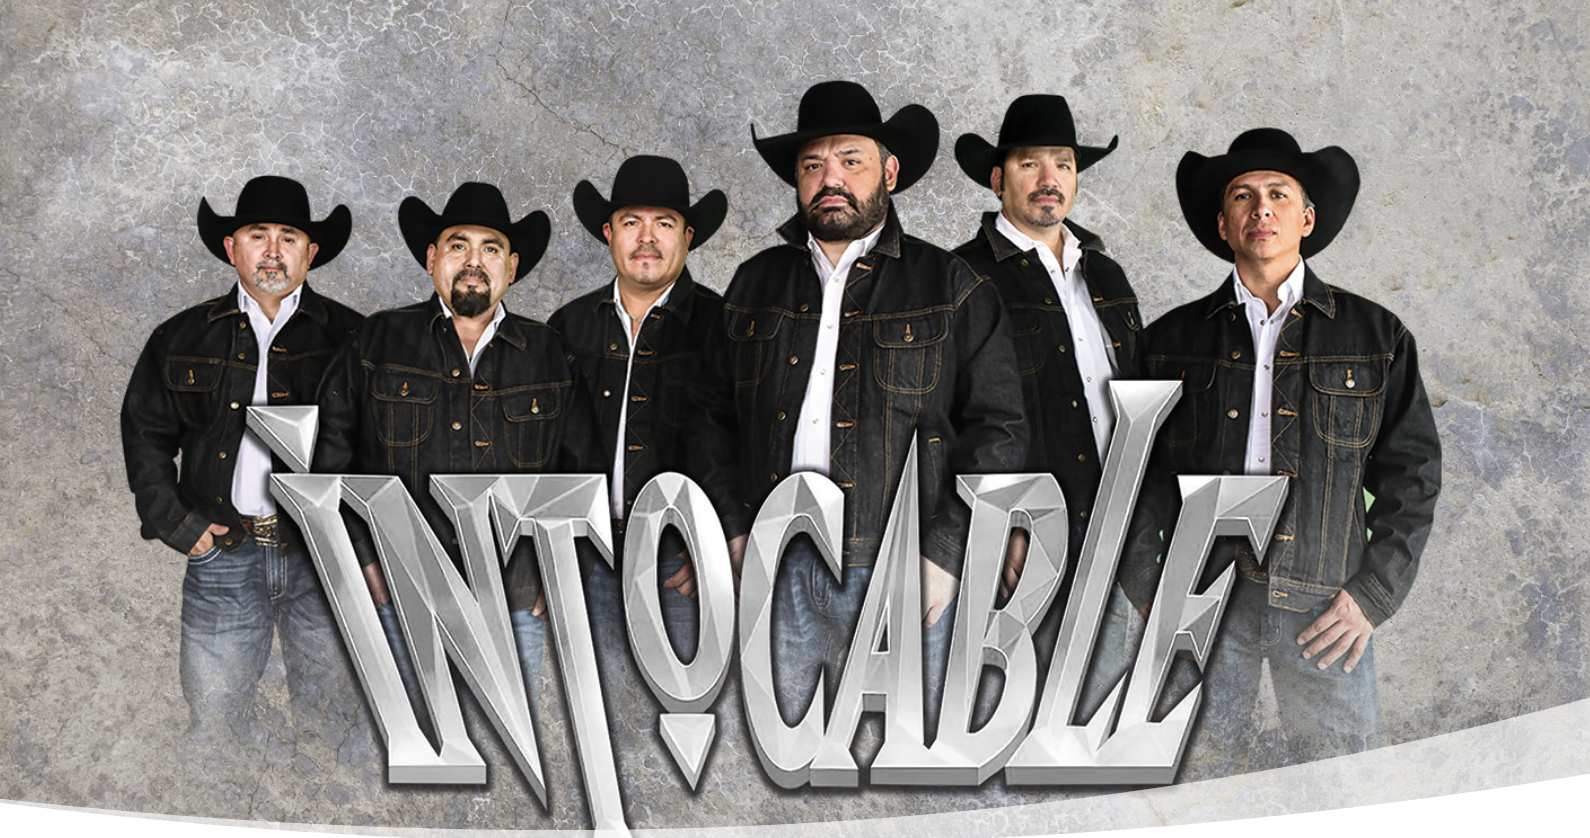 Intocable+at+Inn+of+the+Mountain+Gods.png (2.02 MB)